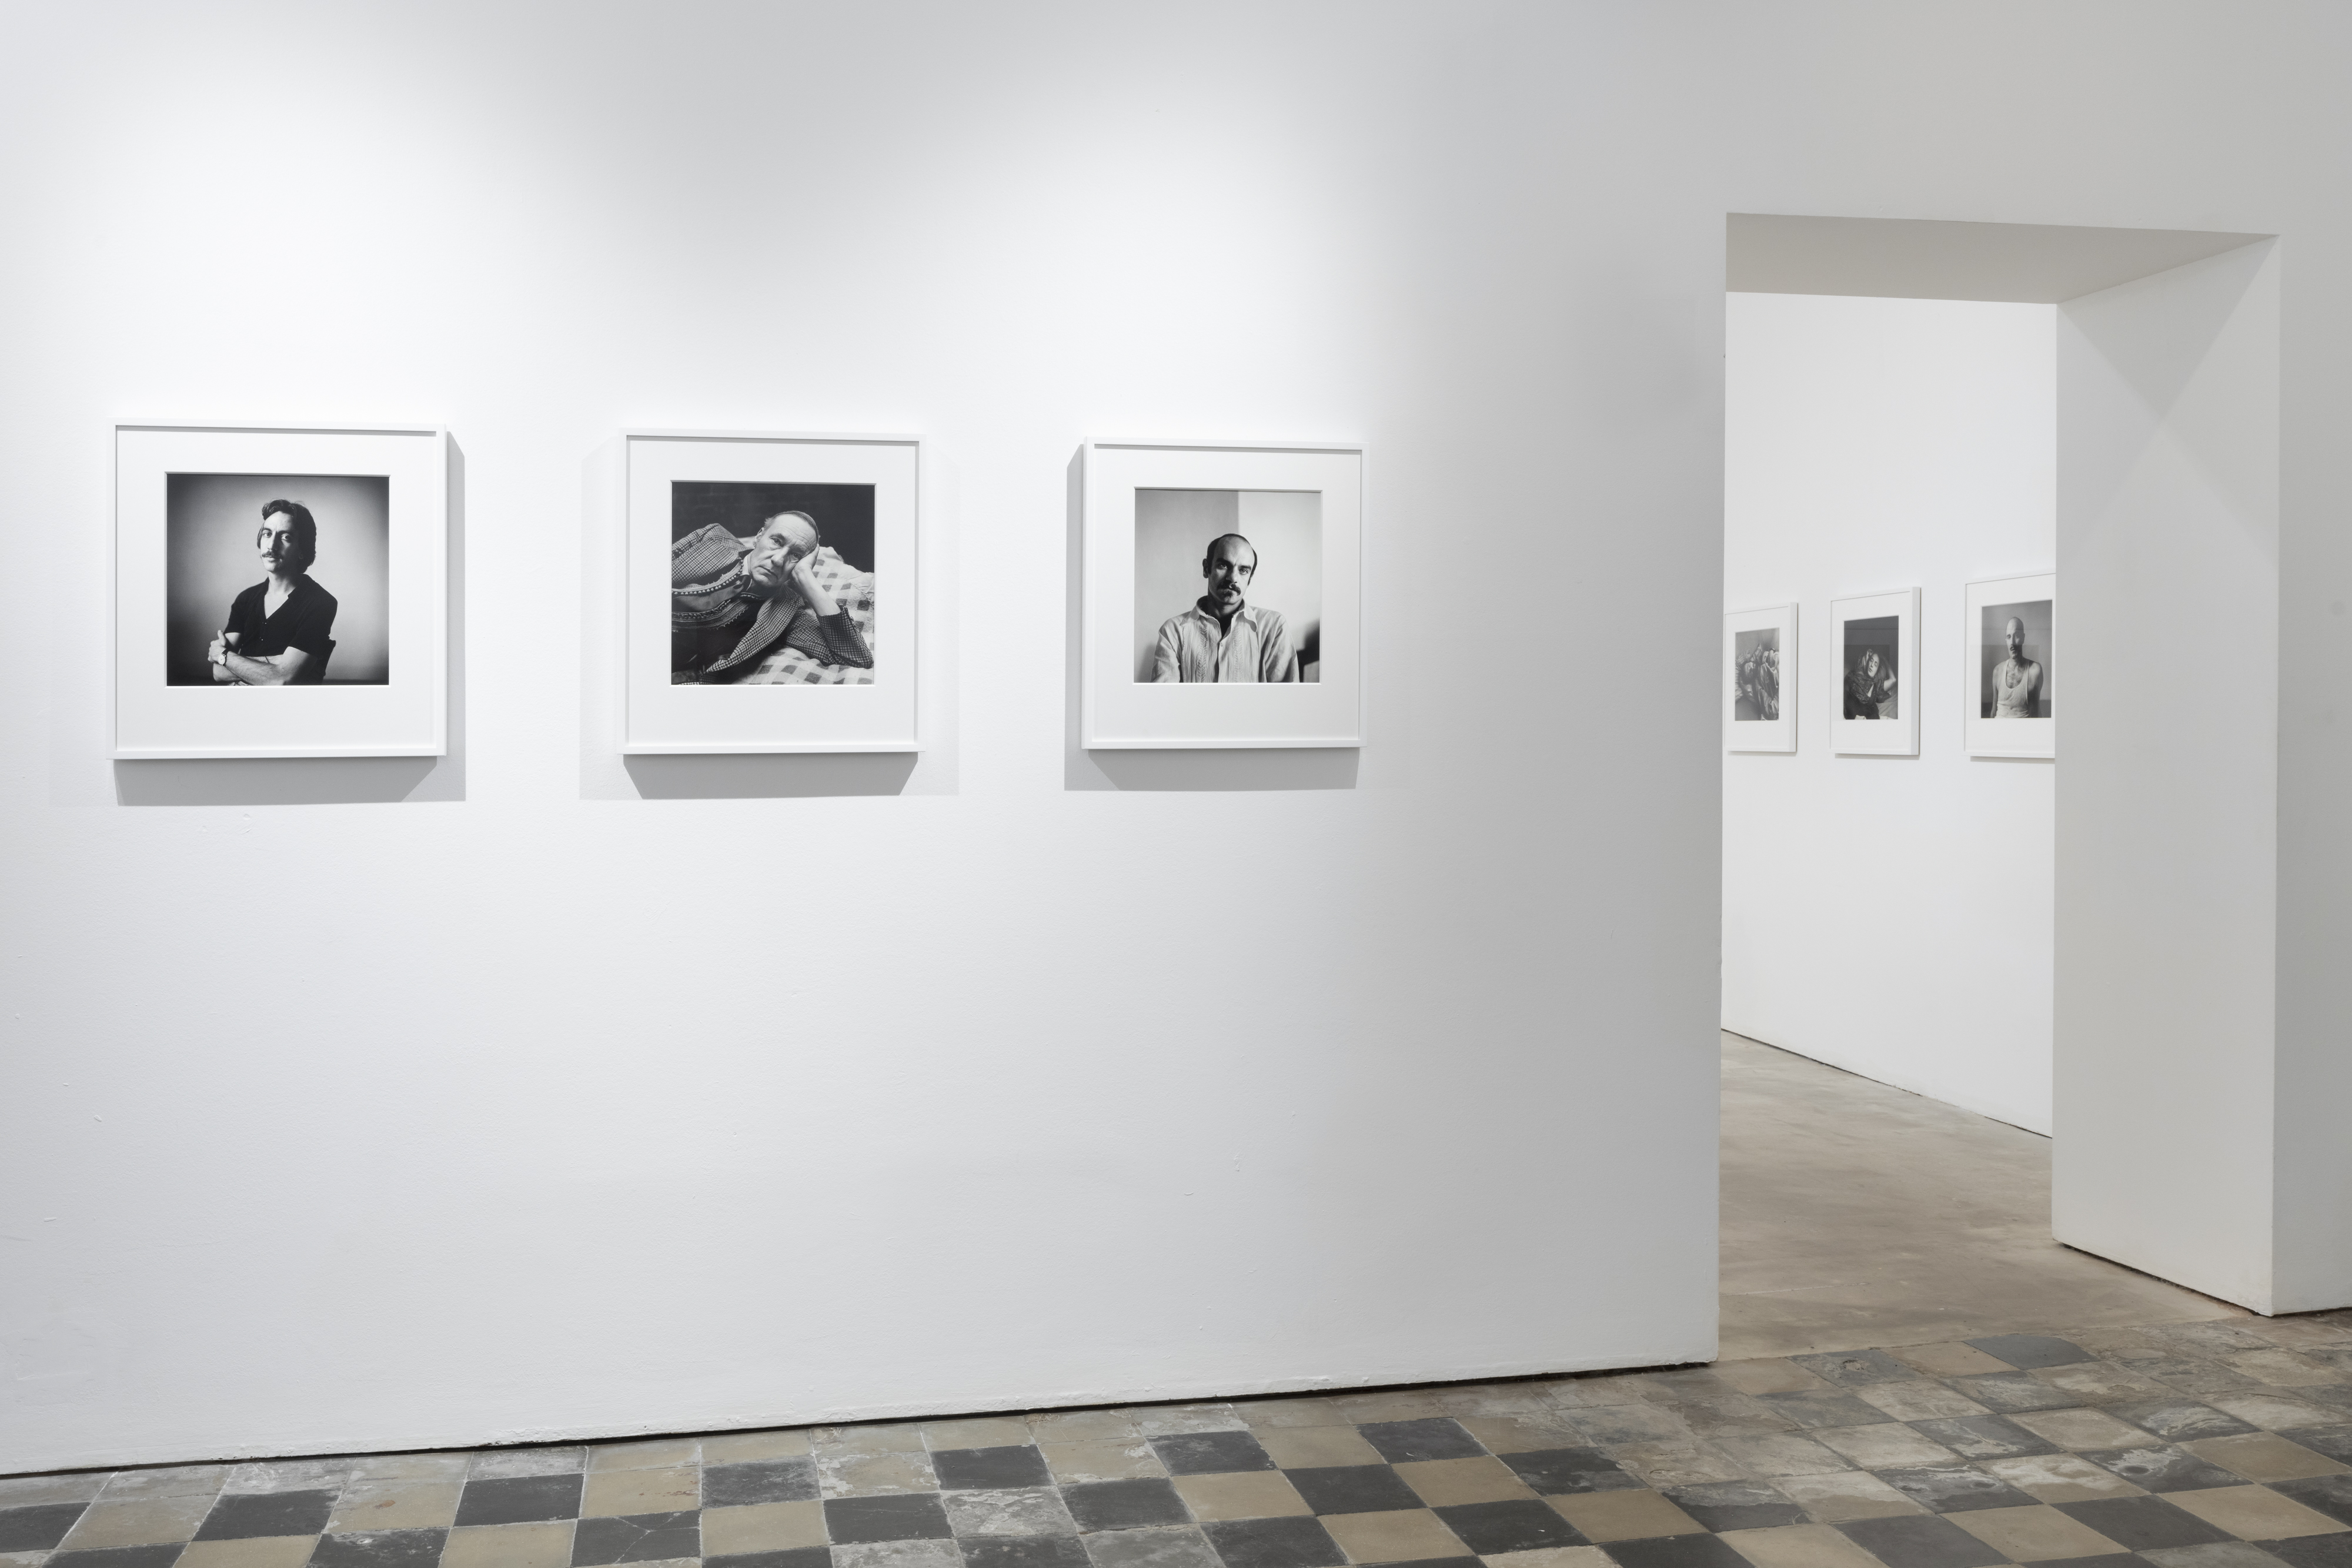 Color image of an exhibition of black and white photographs depicting various portraits framed in white on white walls